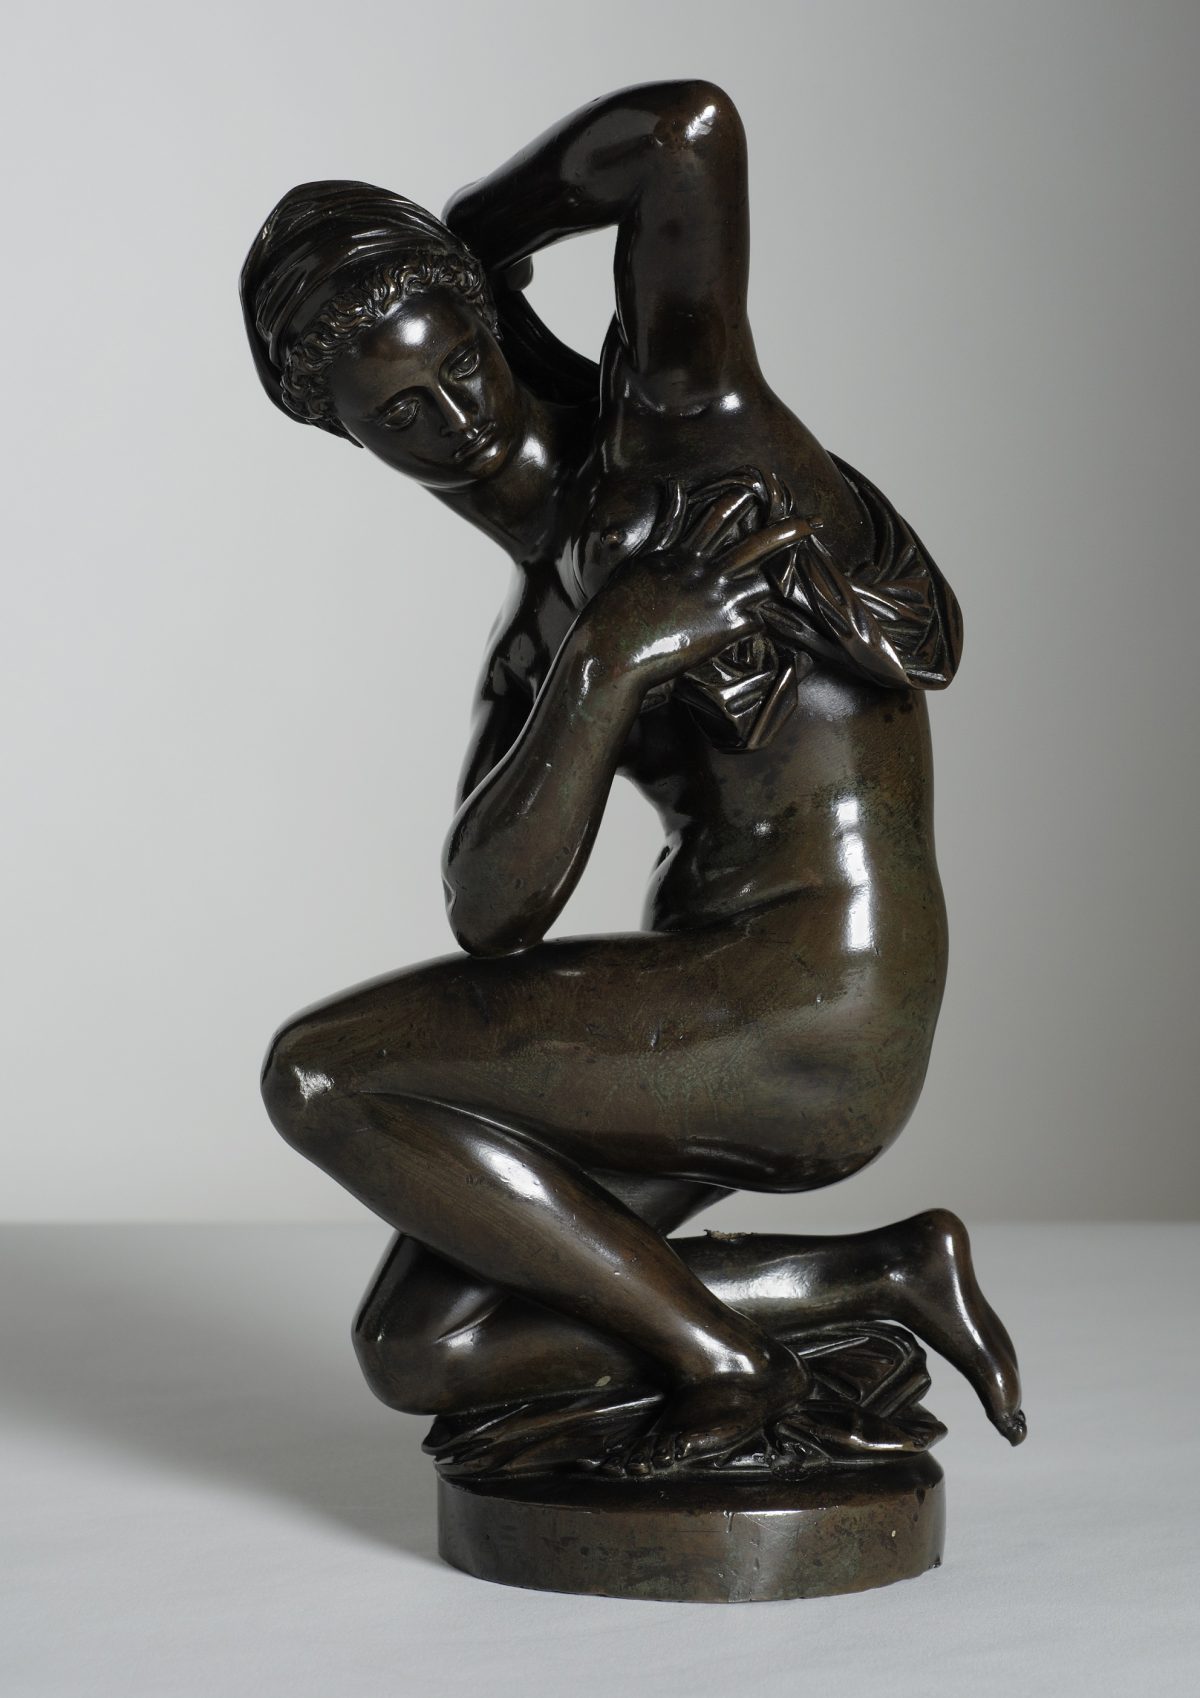 The "Crouching Venus" was meant to kindle contemplation, discussion, storytelling, and display beauty in different ways. (Holburne Museum)